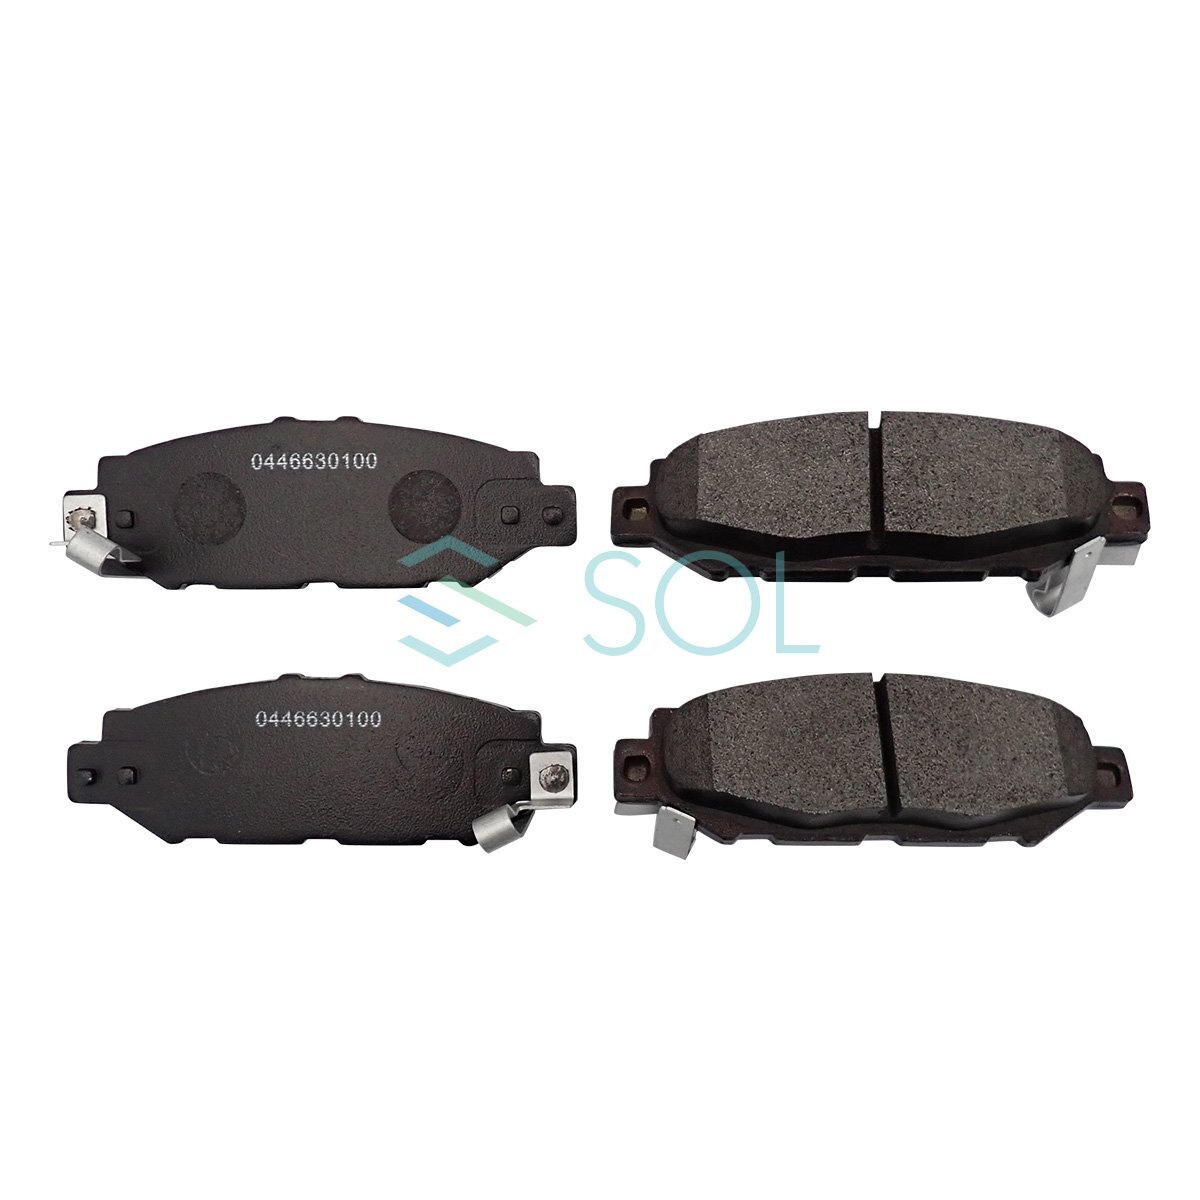  Toyota Touring Hiace RCH41W RCH47W rear brake pad left right set shipping deadline 18 hour car make special design 0446630100 0446626010